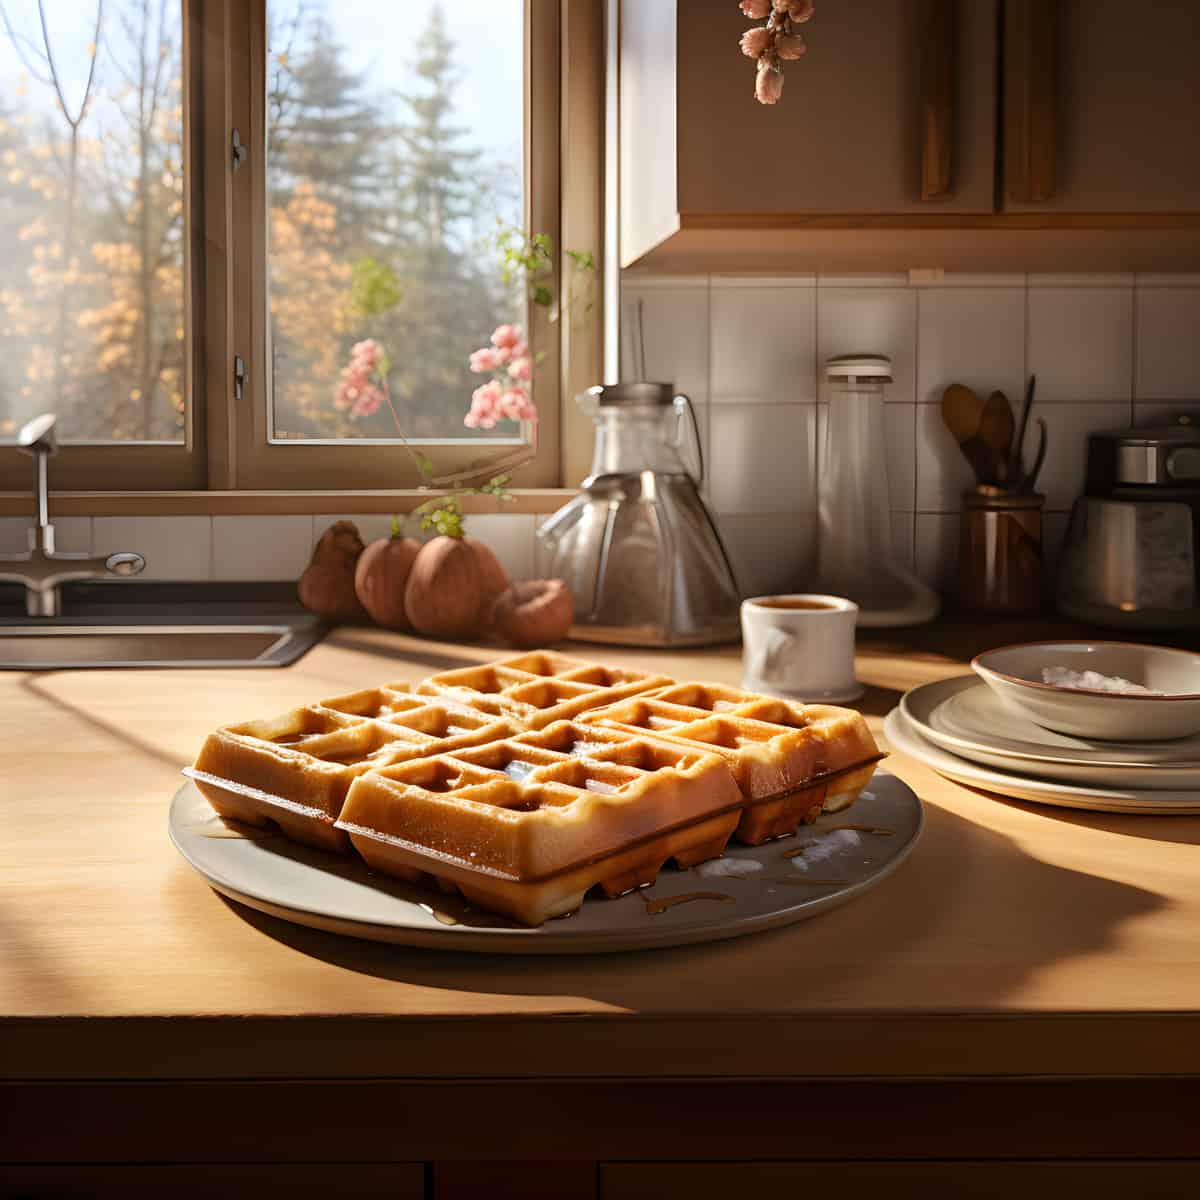 Waffles on a kitchen counter